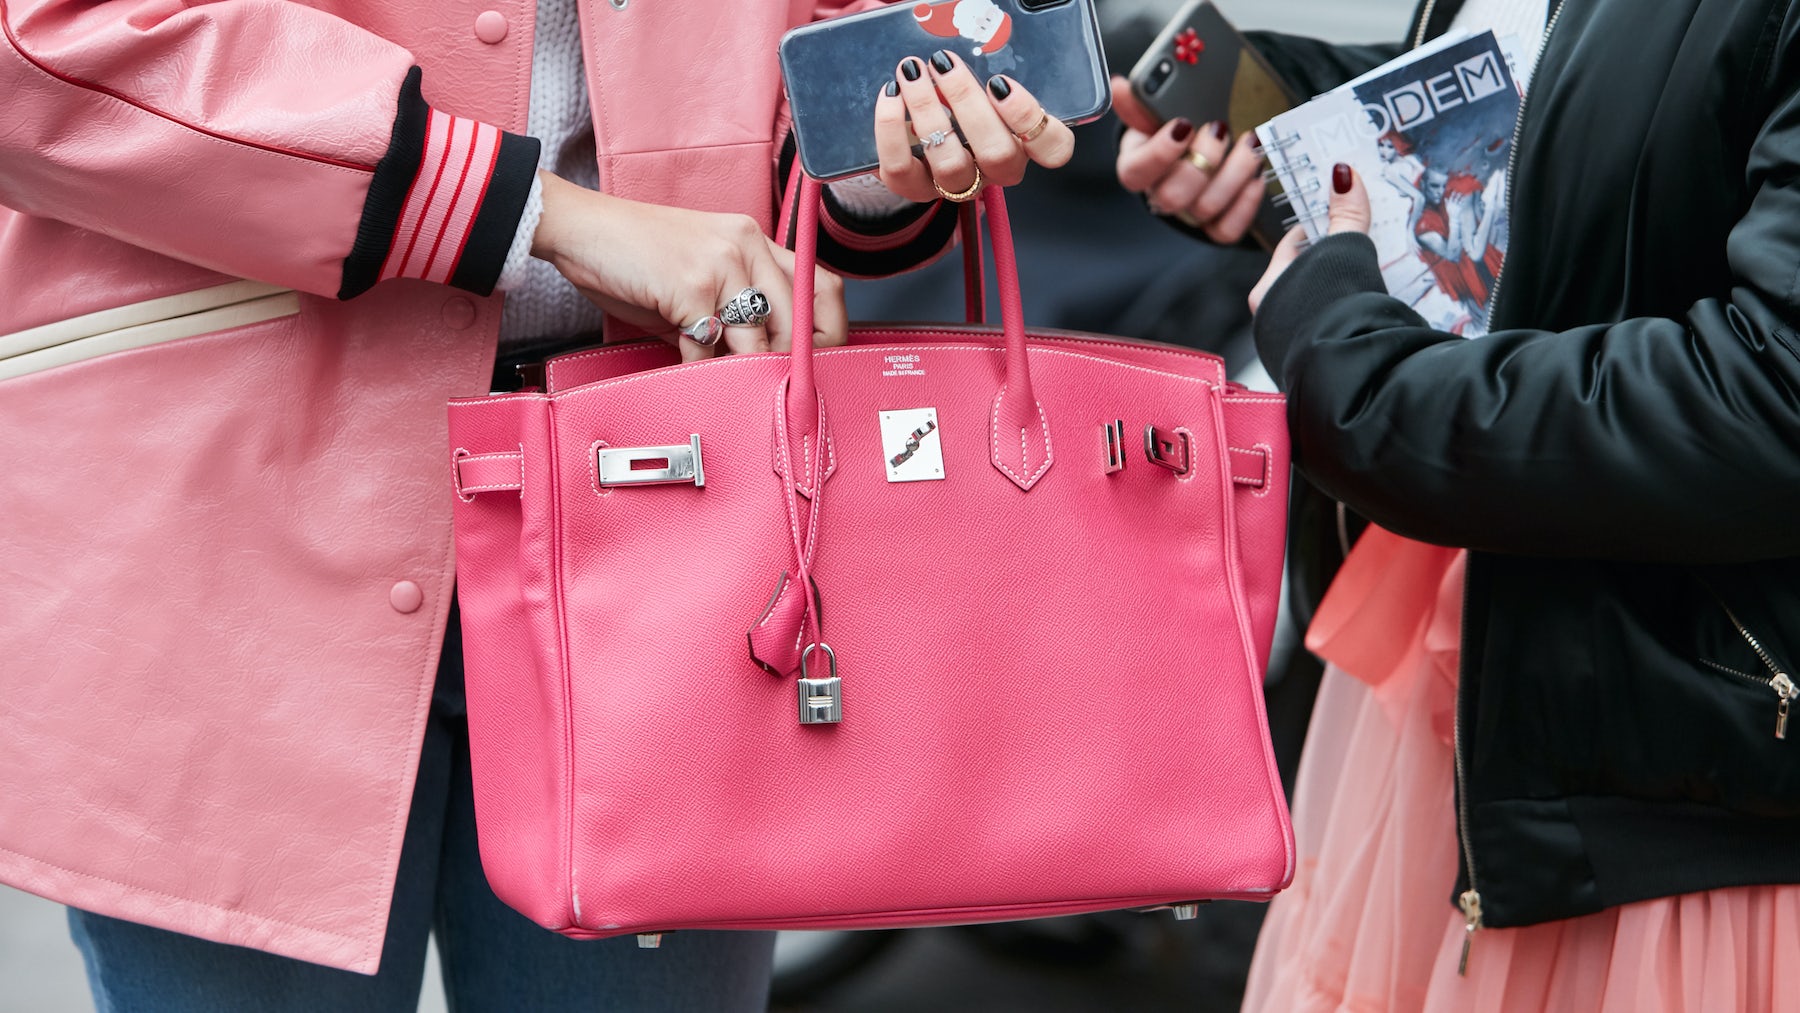 Hermes to open new leather goods factories in France to meet